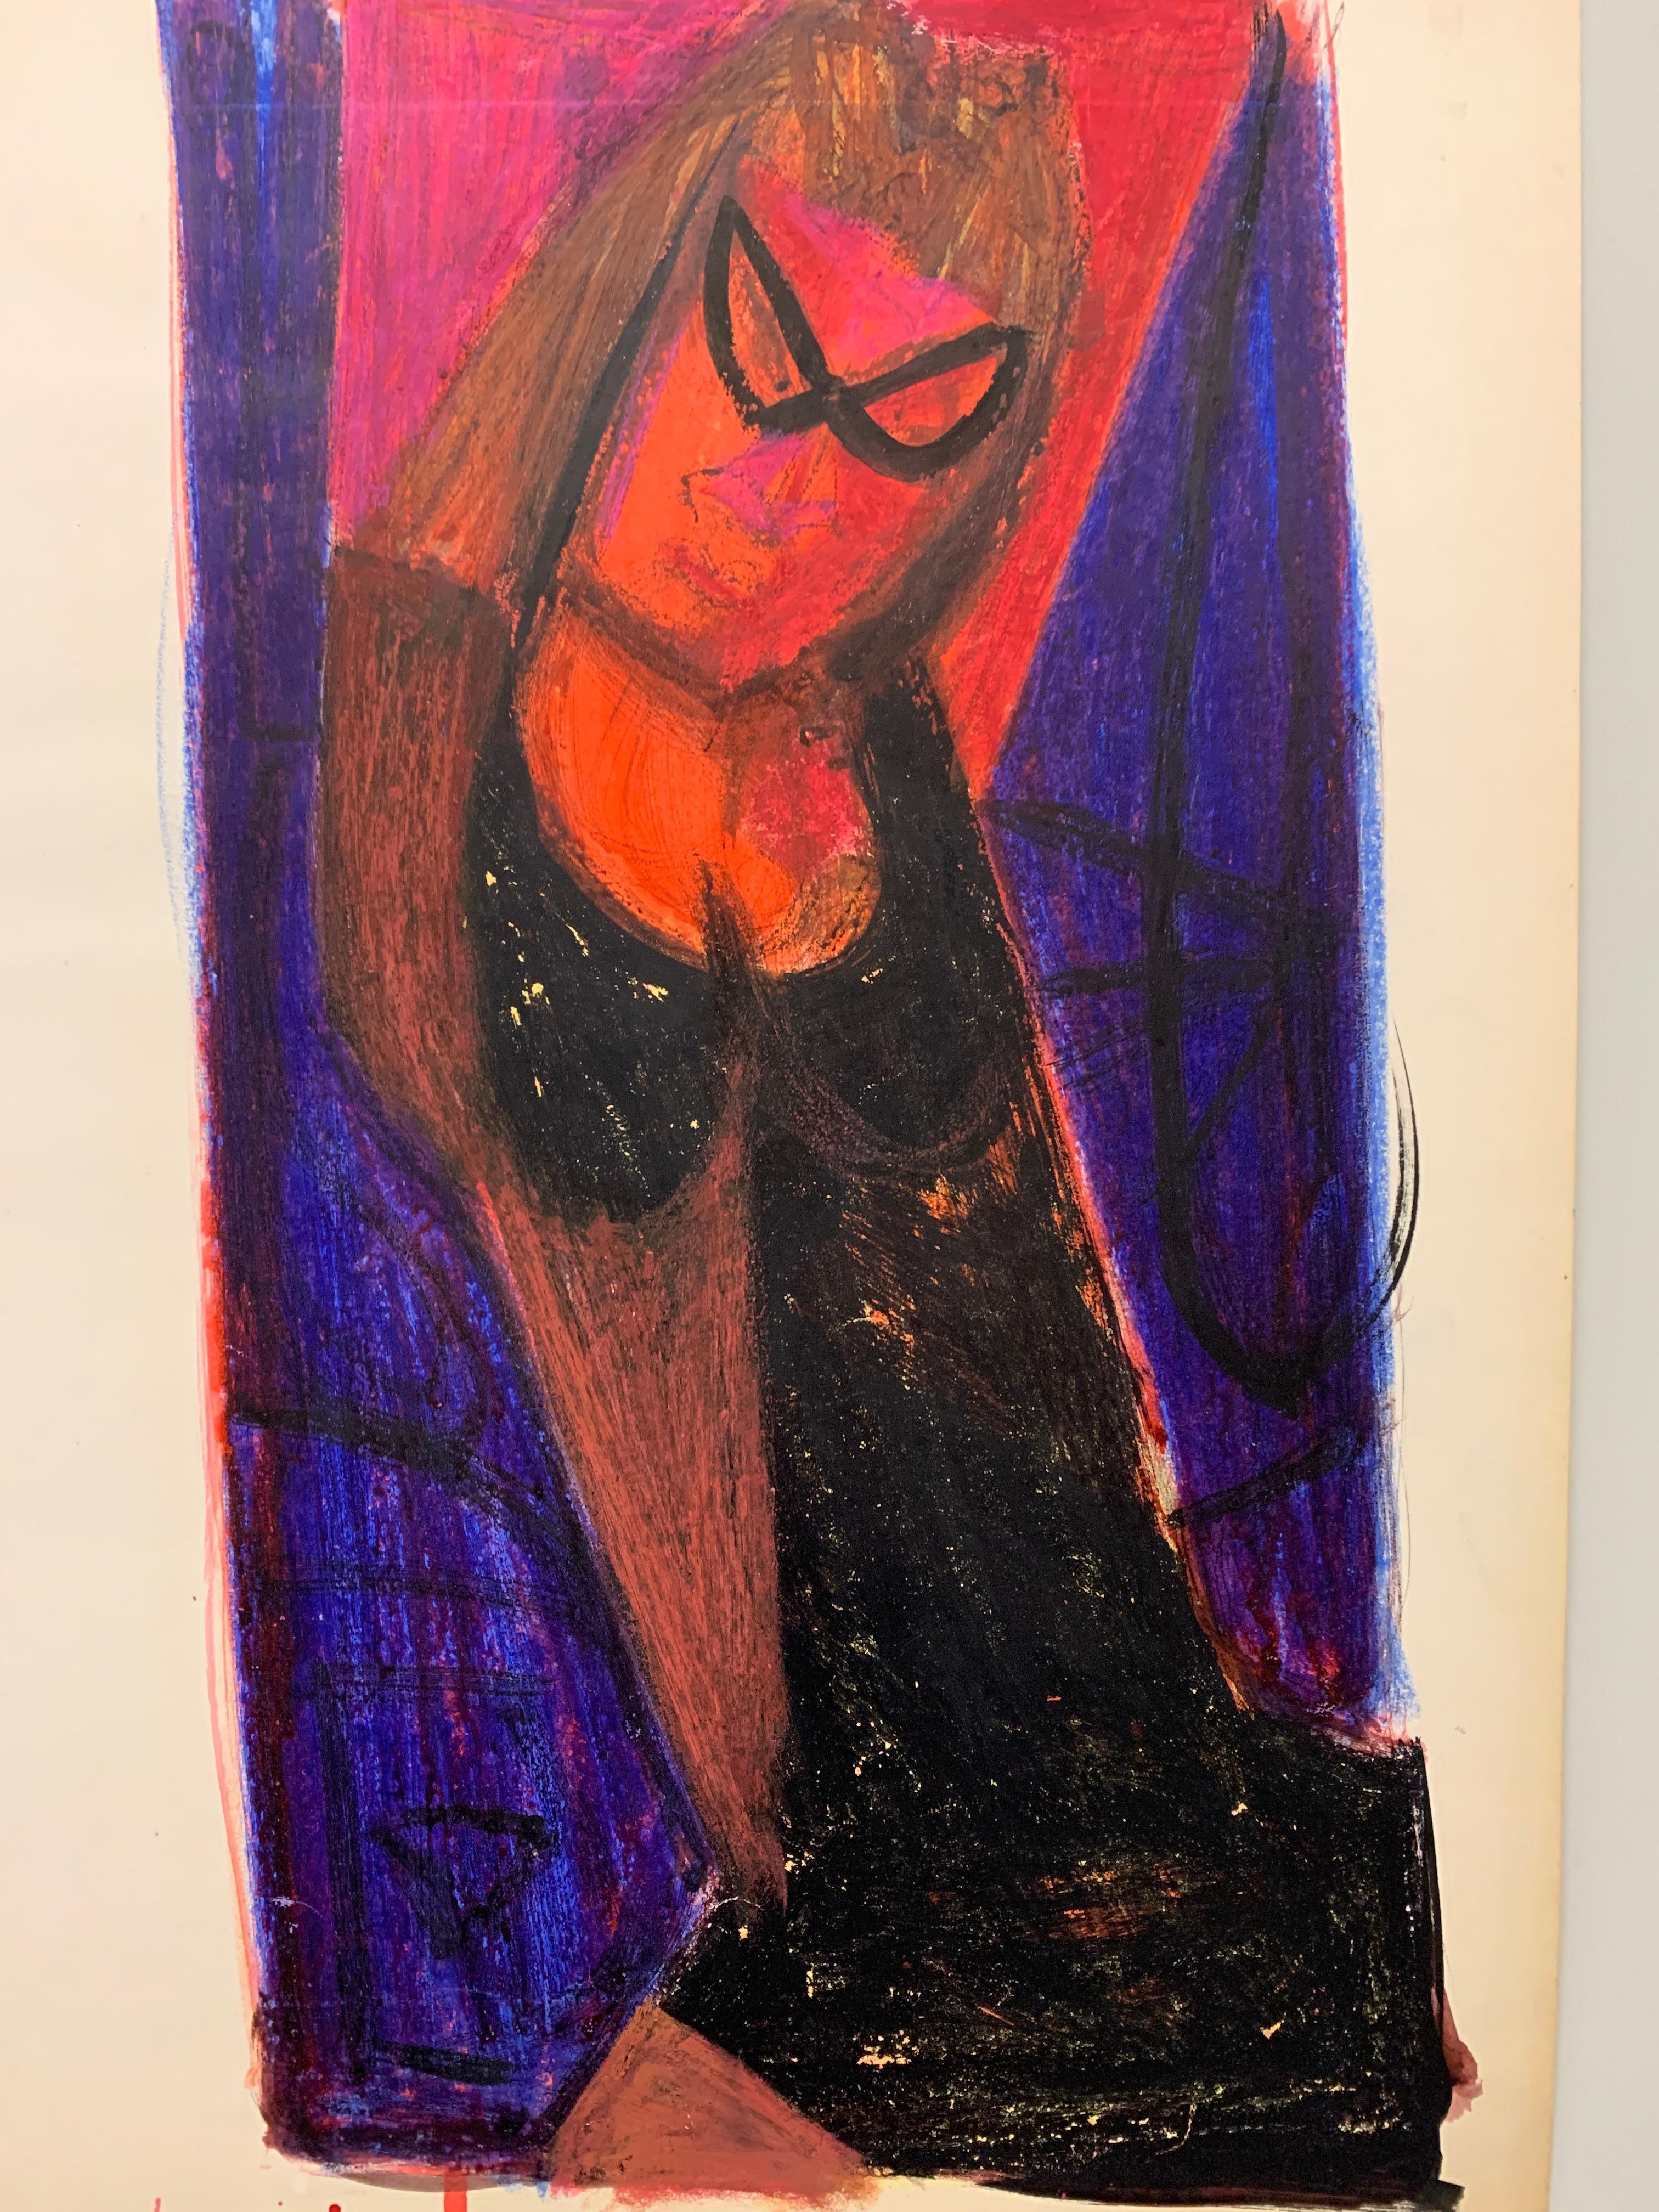 Donald Stacy
"Ms.Y"
c. 1950s
Gouache and oil pastel on paper
14" x 17" unframed
Unsigned
Came from artist's estate

Donald Stacy (1925-2011) New Jersey

Studied: Newark School of Fine Art
The Art Students League
Pratt Graphic Arts Center
University